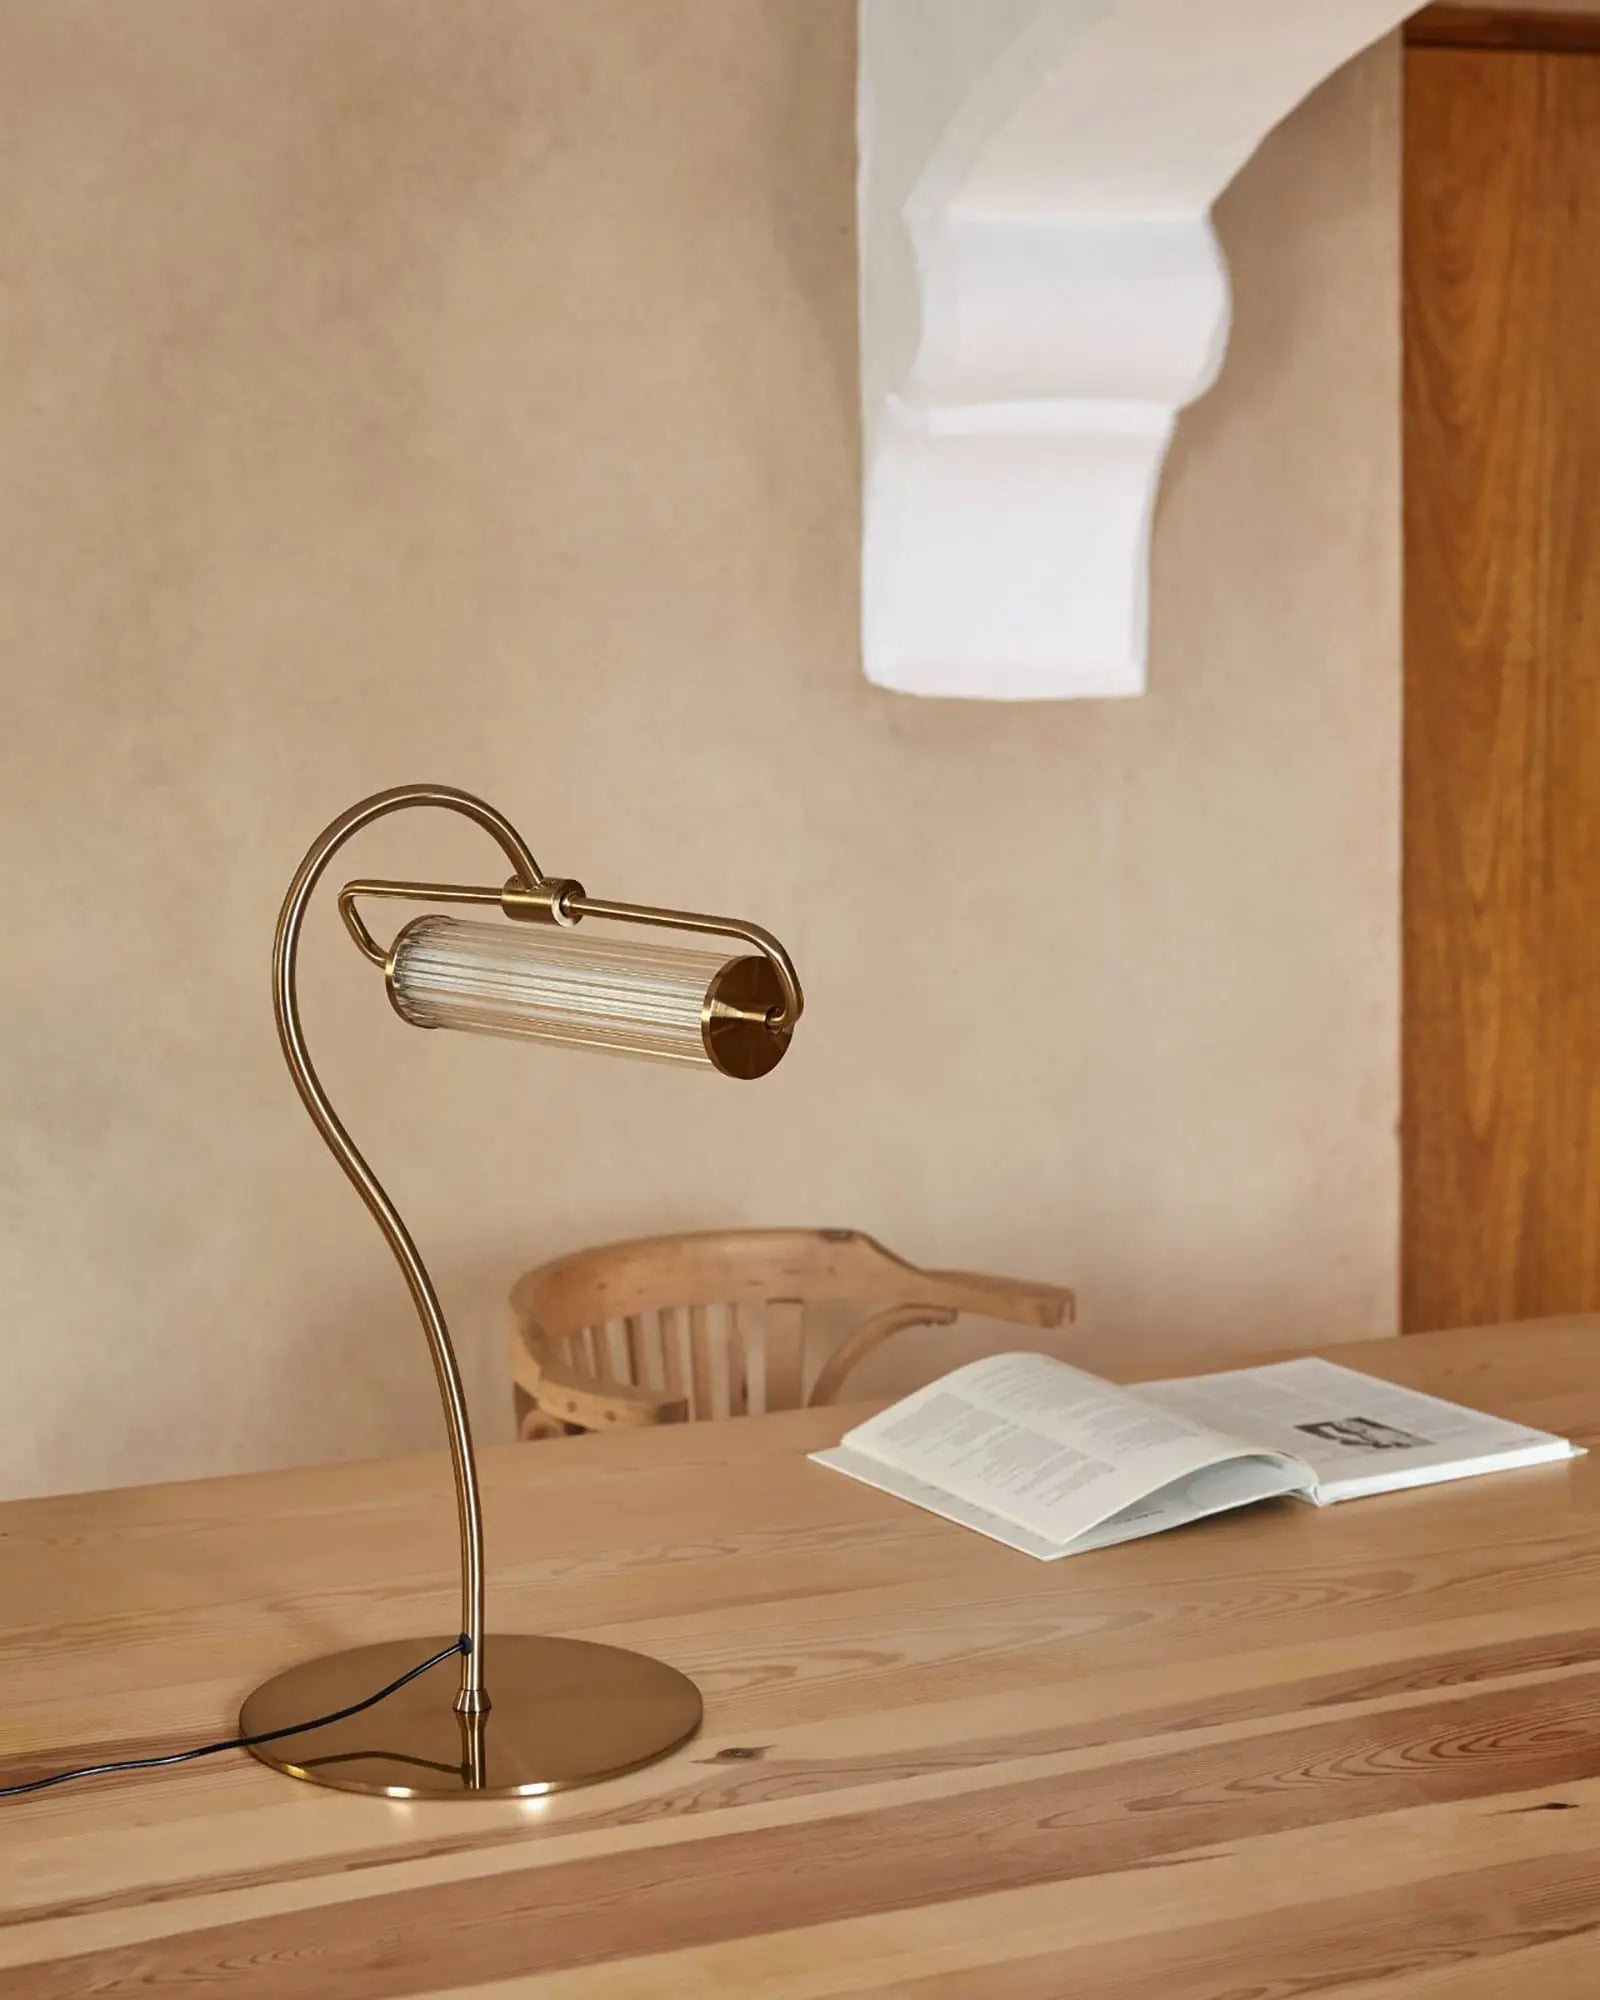 Ison contemporary pendant light with ribbed glass shade on a wooden desk